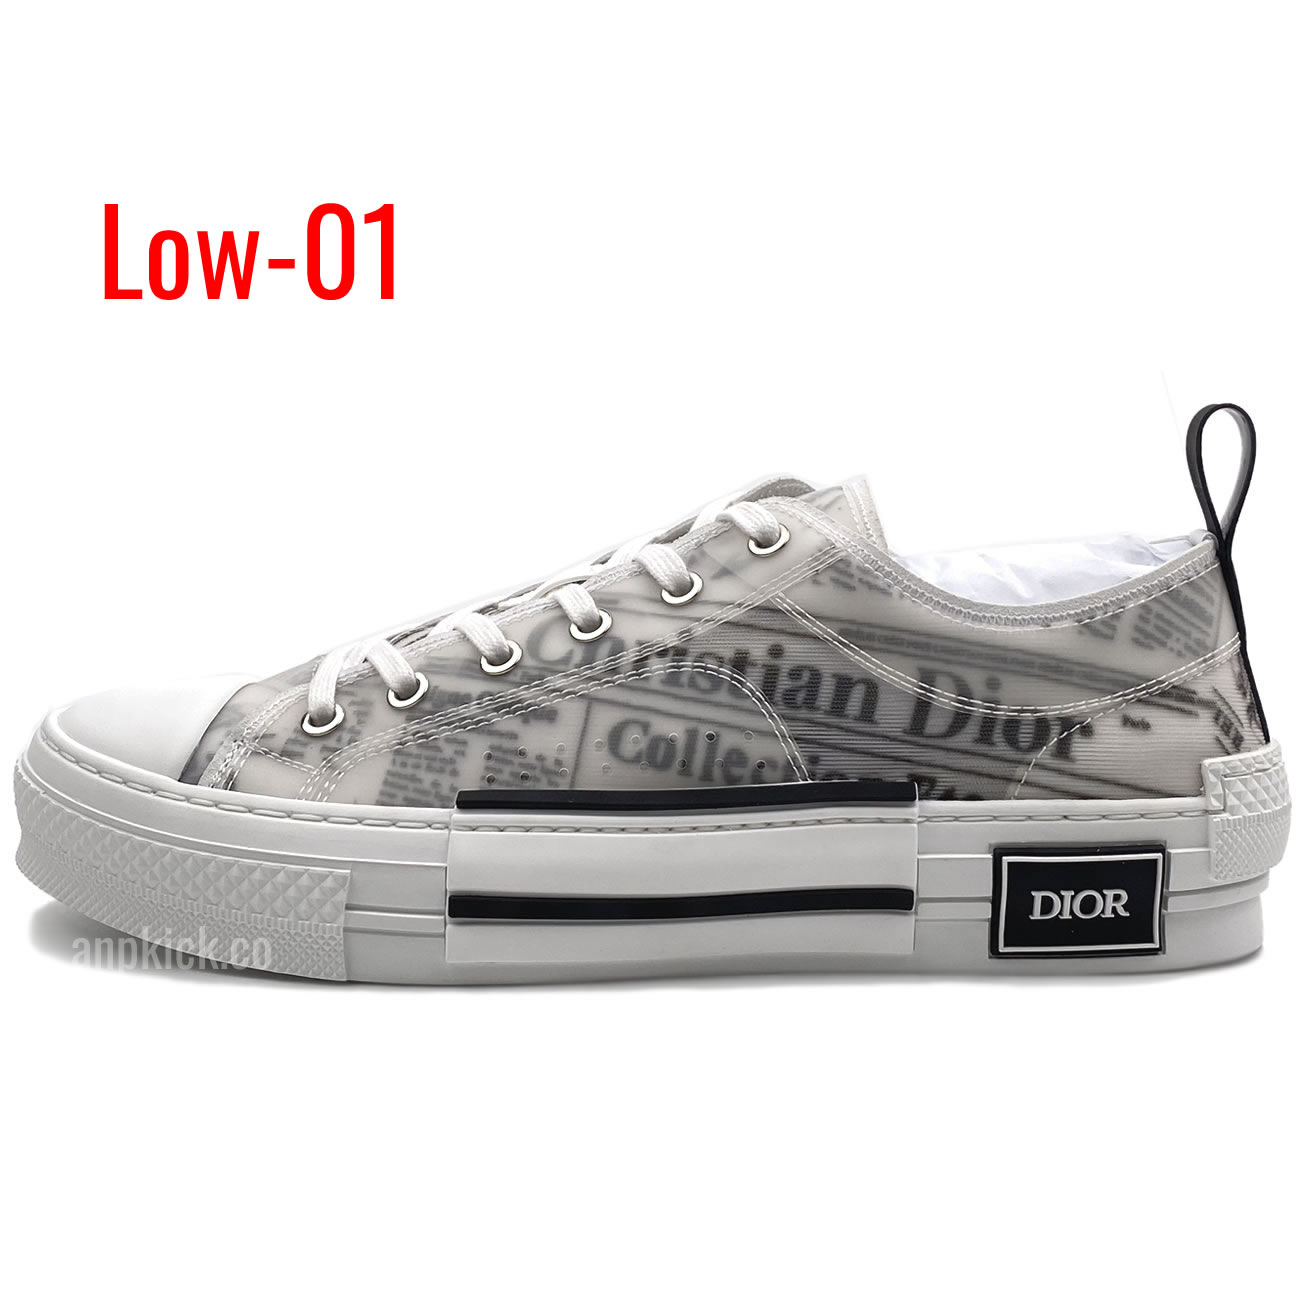 Dior B23 Low Shoes (1) - newkick.org